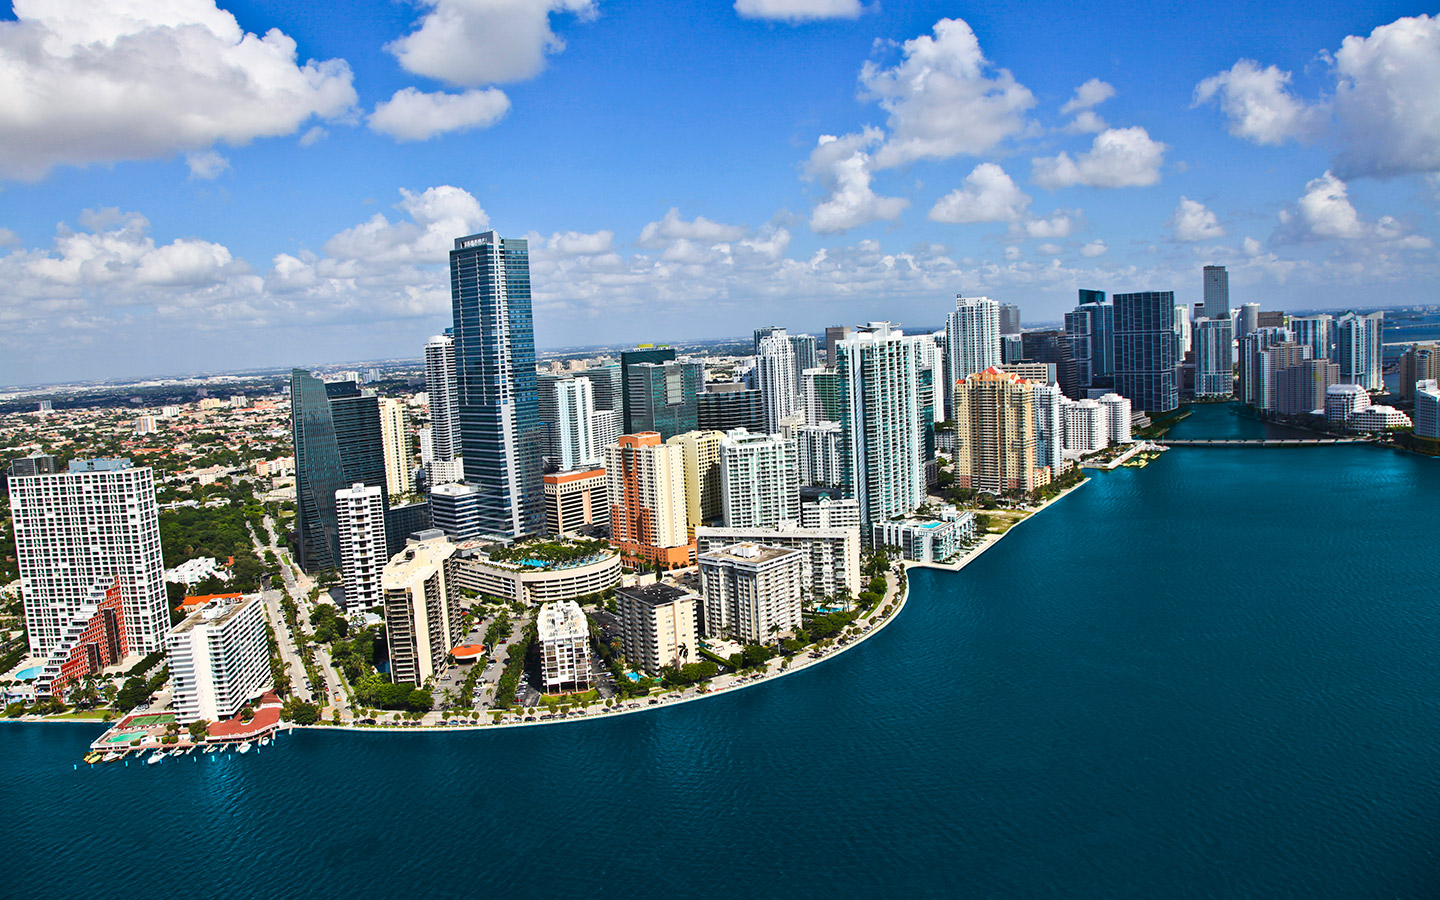 Aerial view of  the buildings on Brickell Bay Drive  and the ocean